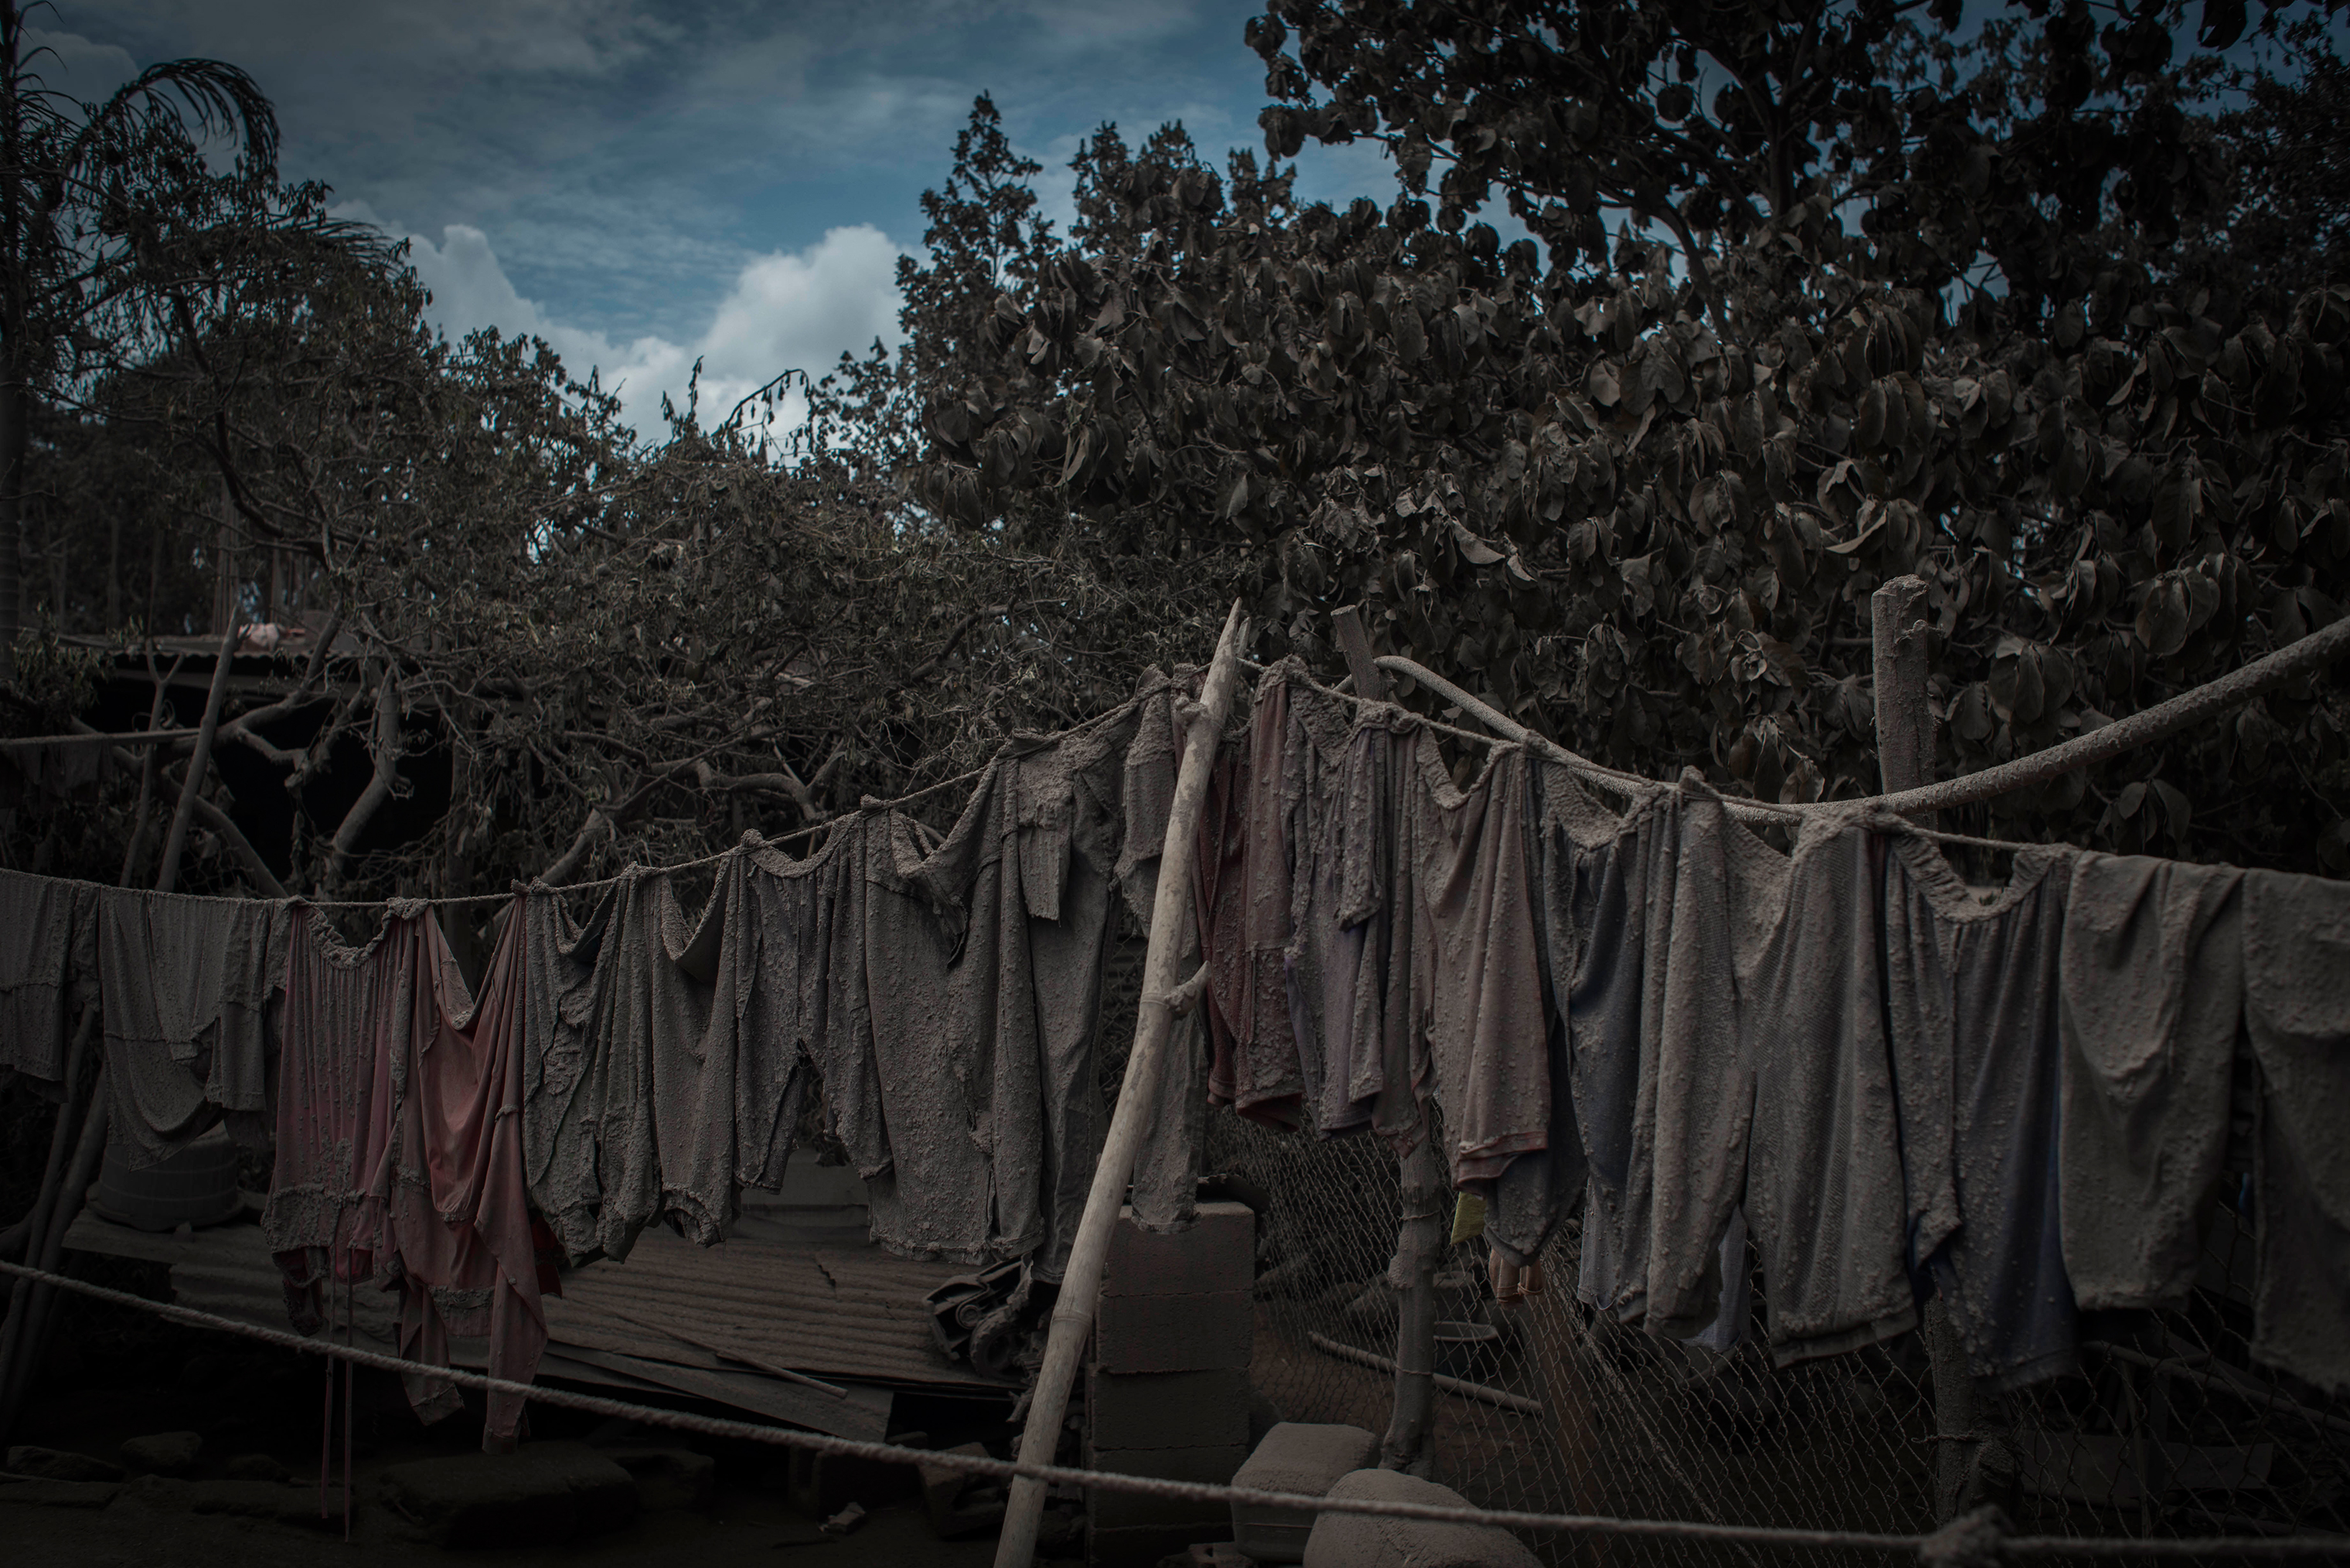 An ash-covered clothesline hangs outside a home in San Miguel Los Lotes on June 5. (Daniele Volpe)